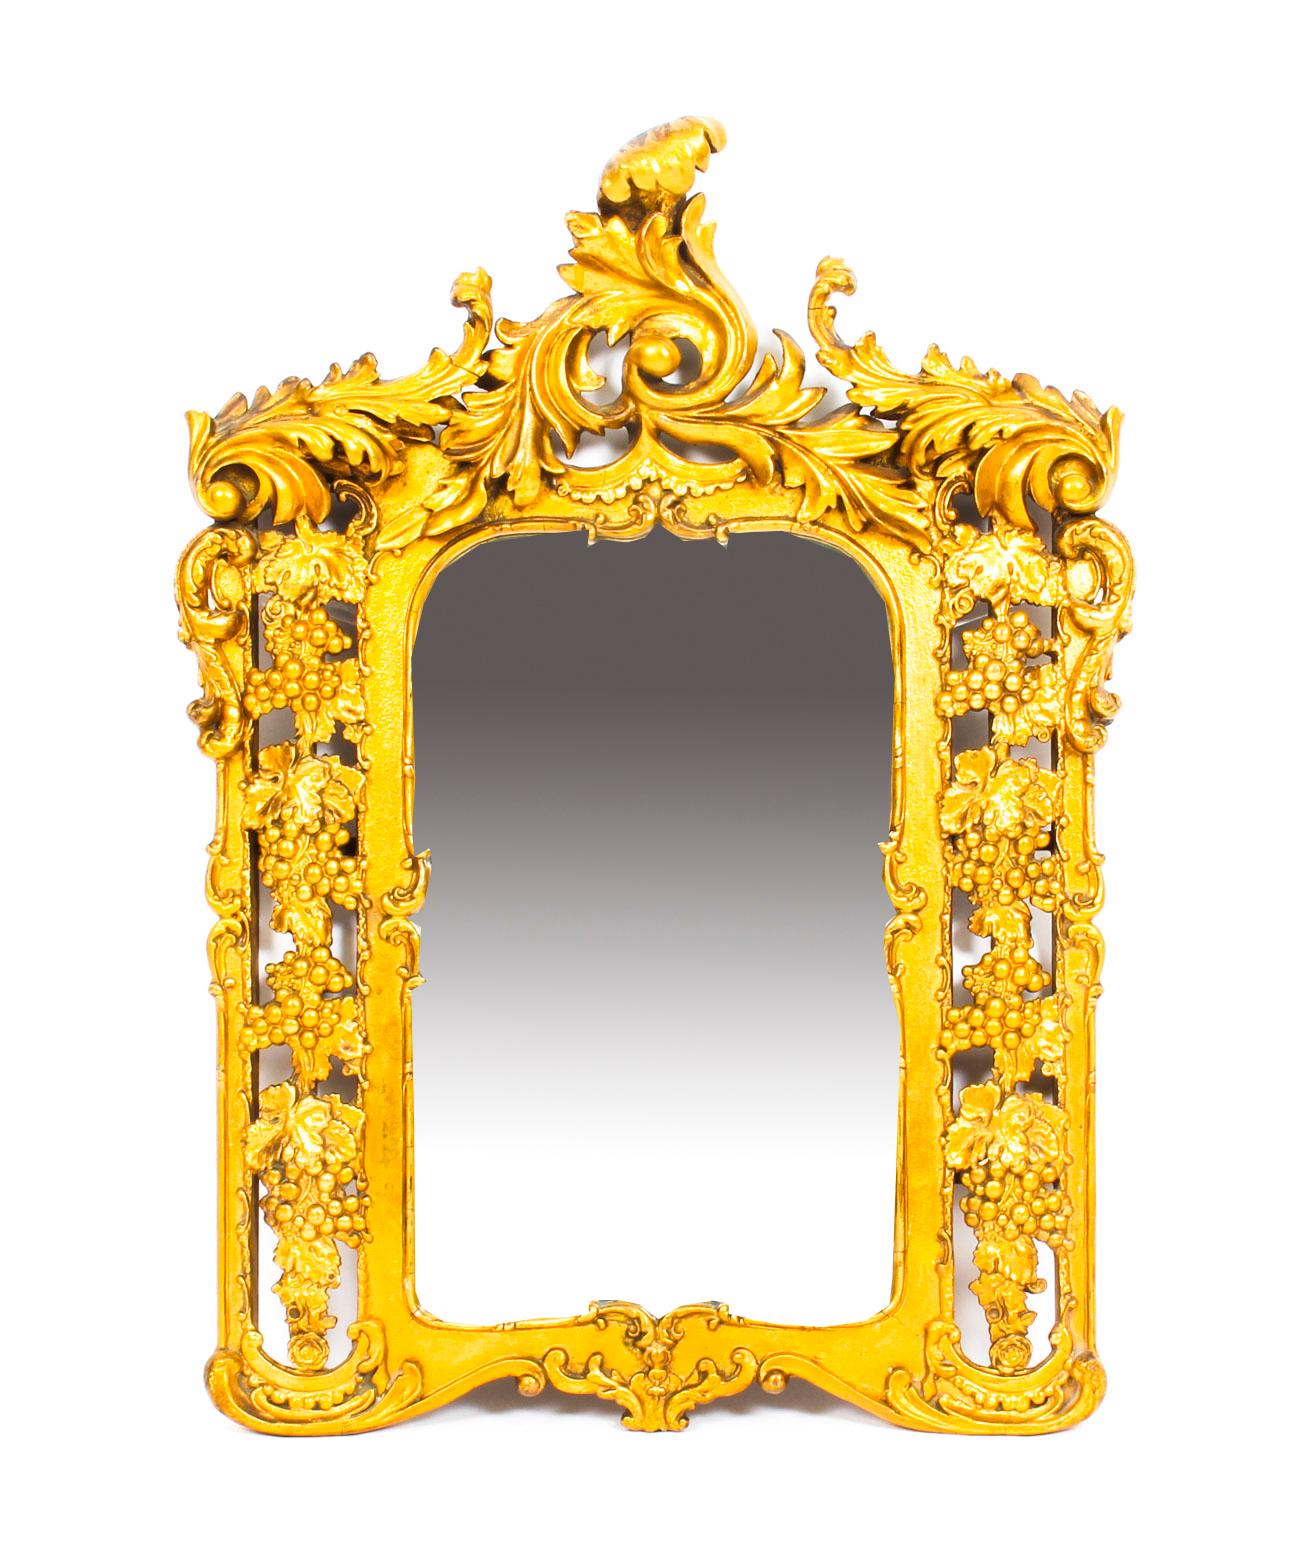 Antique Italian Giltwood Mirror Carved with Fruiting Vines, 19th Century For Sale 3